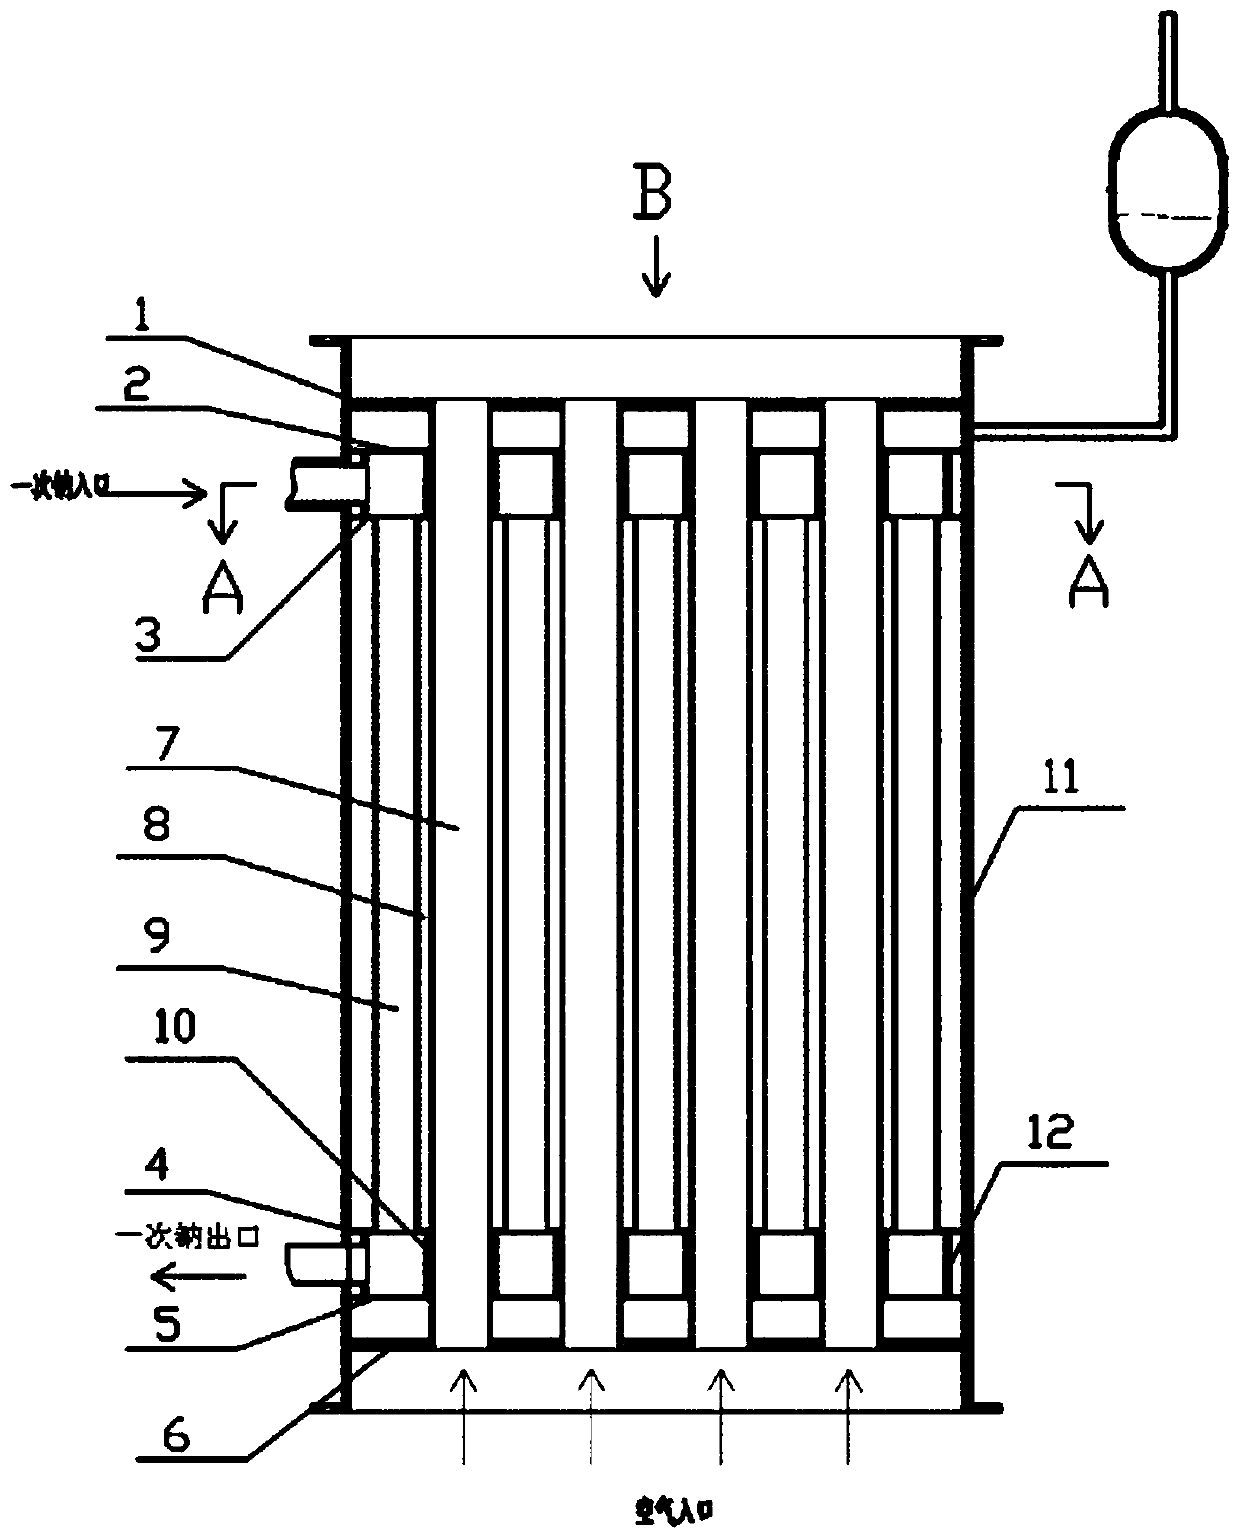 Cylindrical sodium-sodium-air integrated heat exchanger